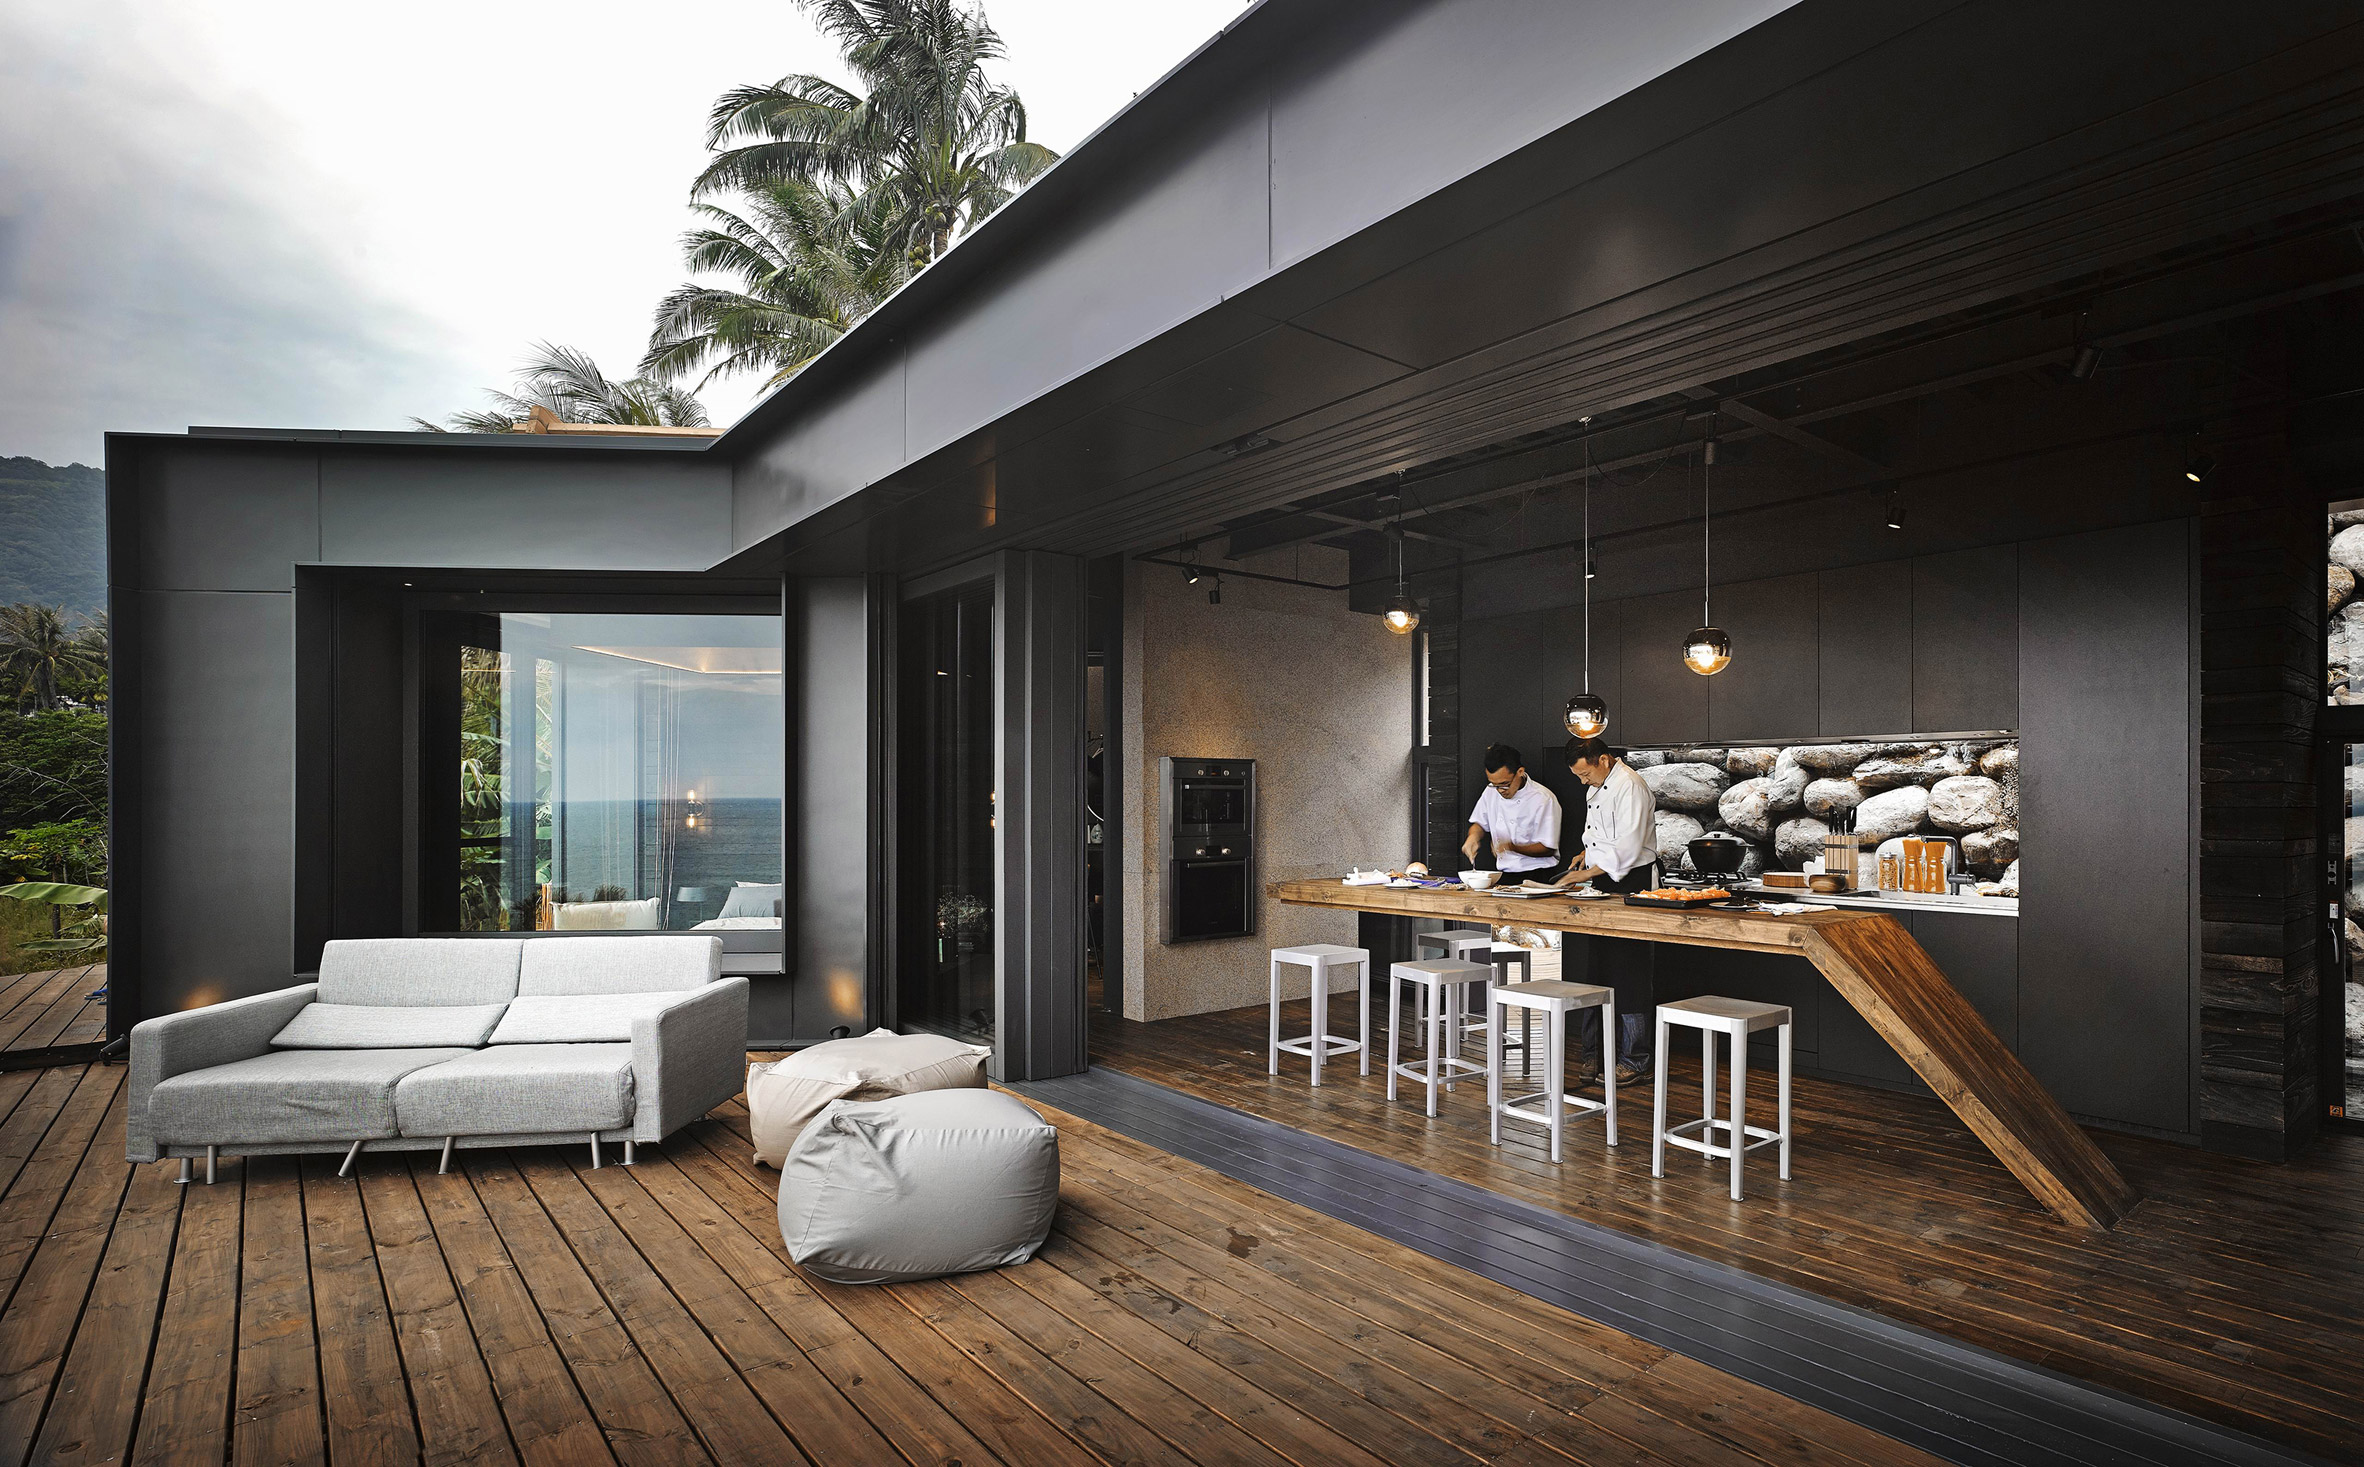 The kitchen is minimalist and dark and it can be opened to the outdoors easily